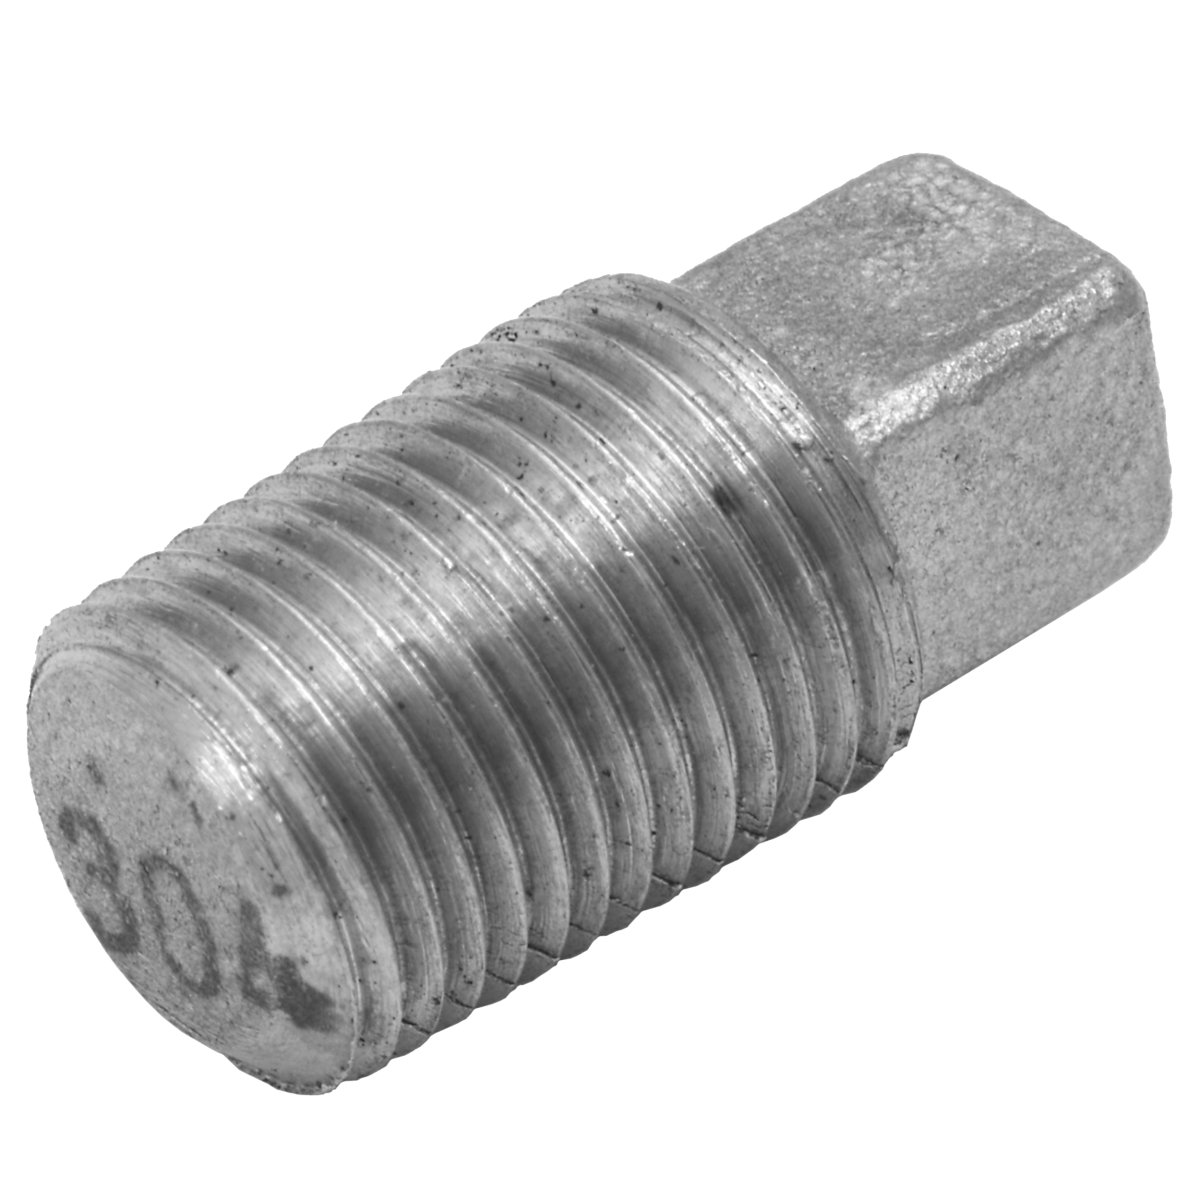 304 Stainless Steel Pipe Fitting 1/2" Square Head Plug